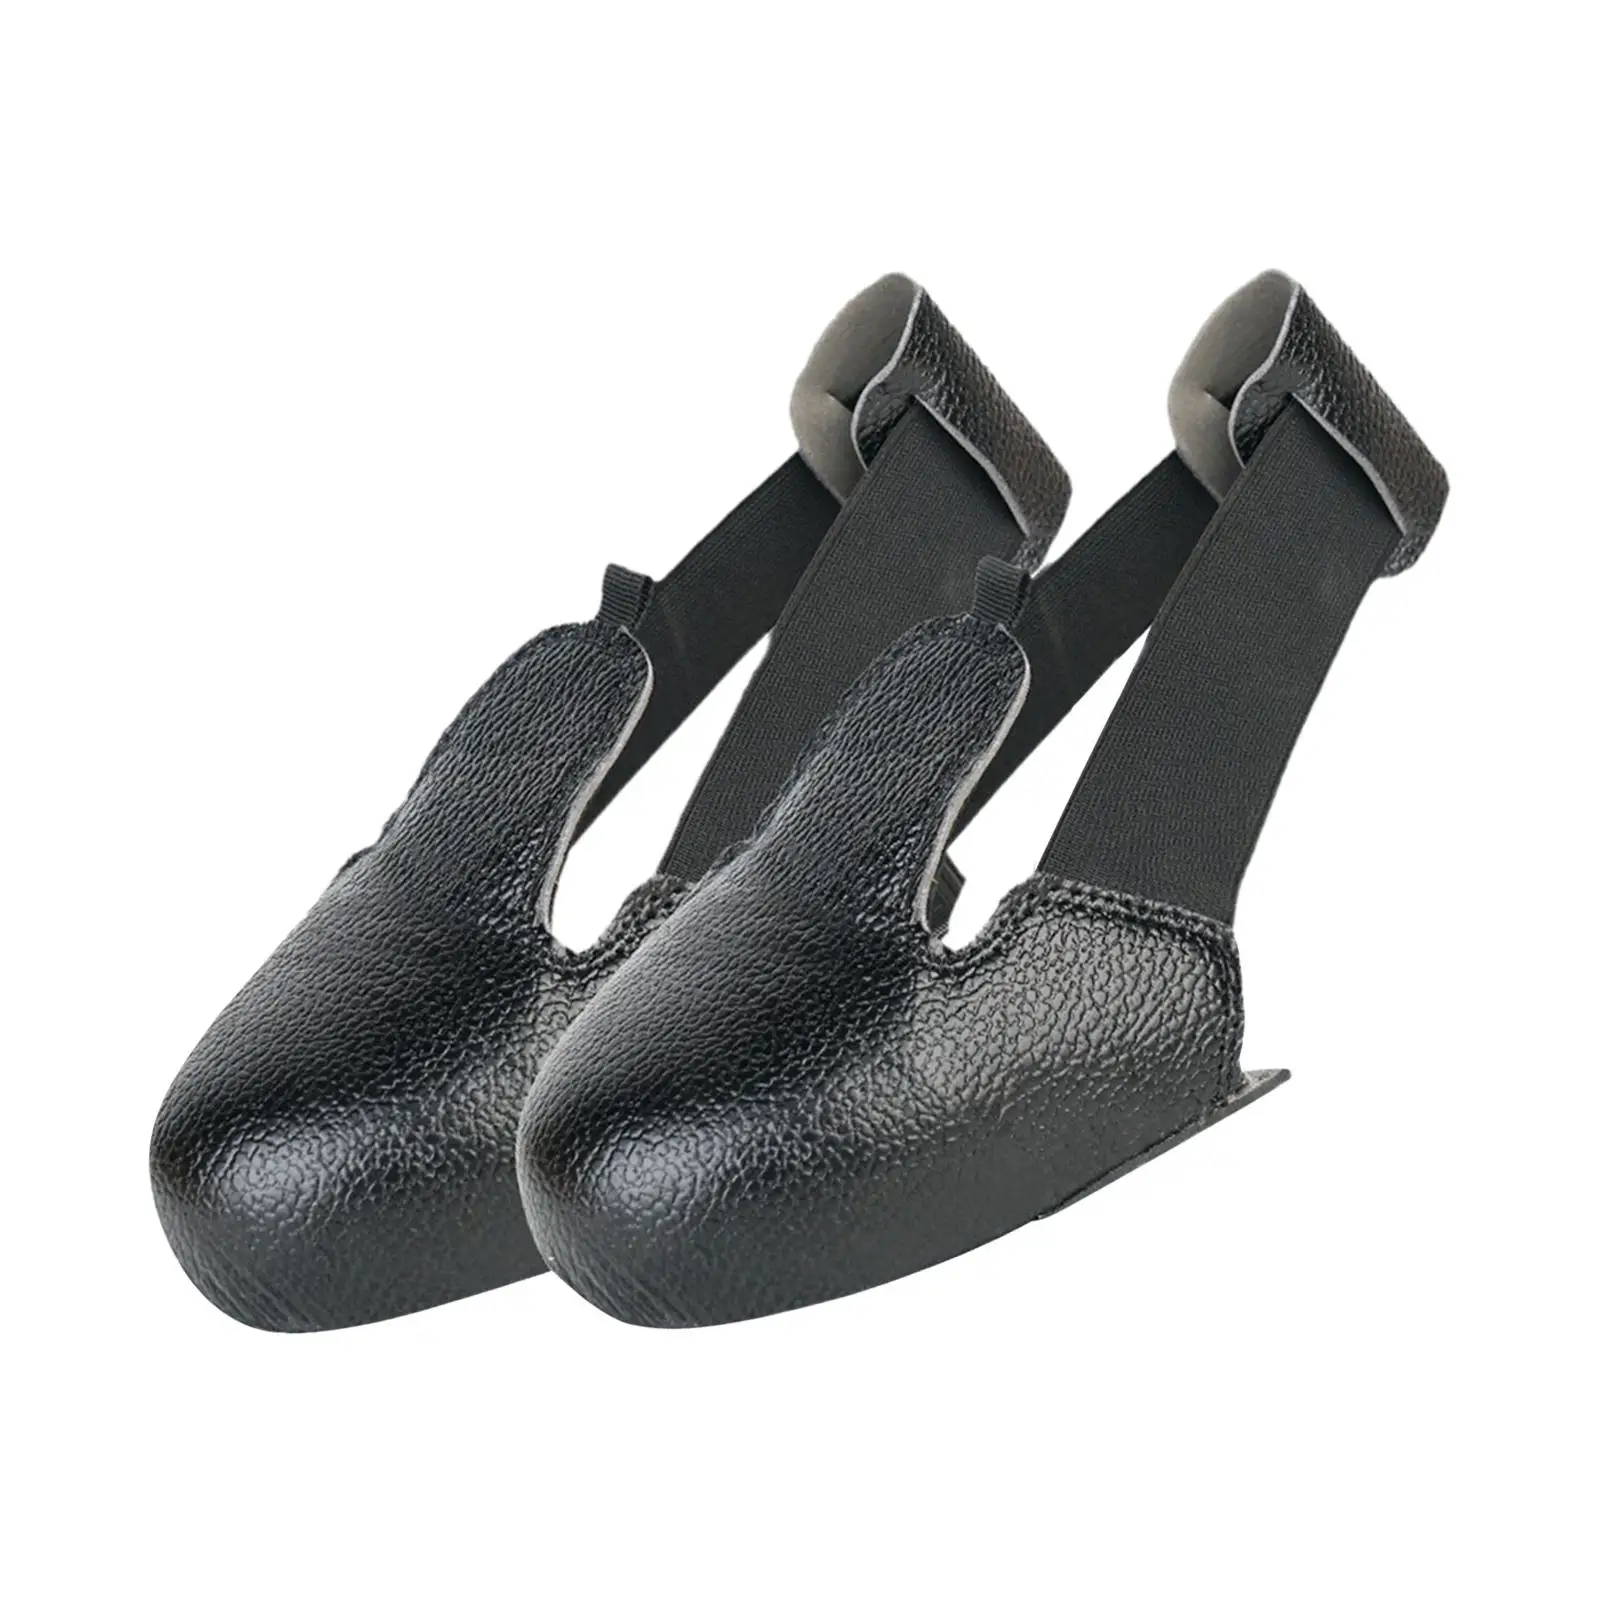 Toe Cap Safety Shoe Covers, Anti Smashing Leather Shoes Covers